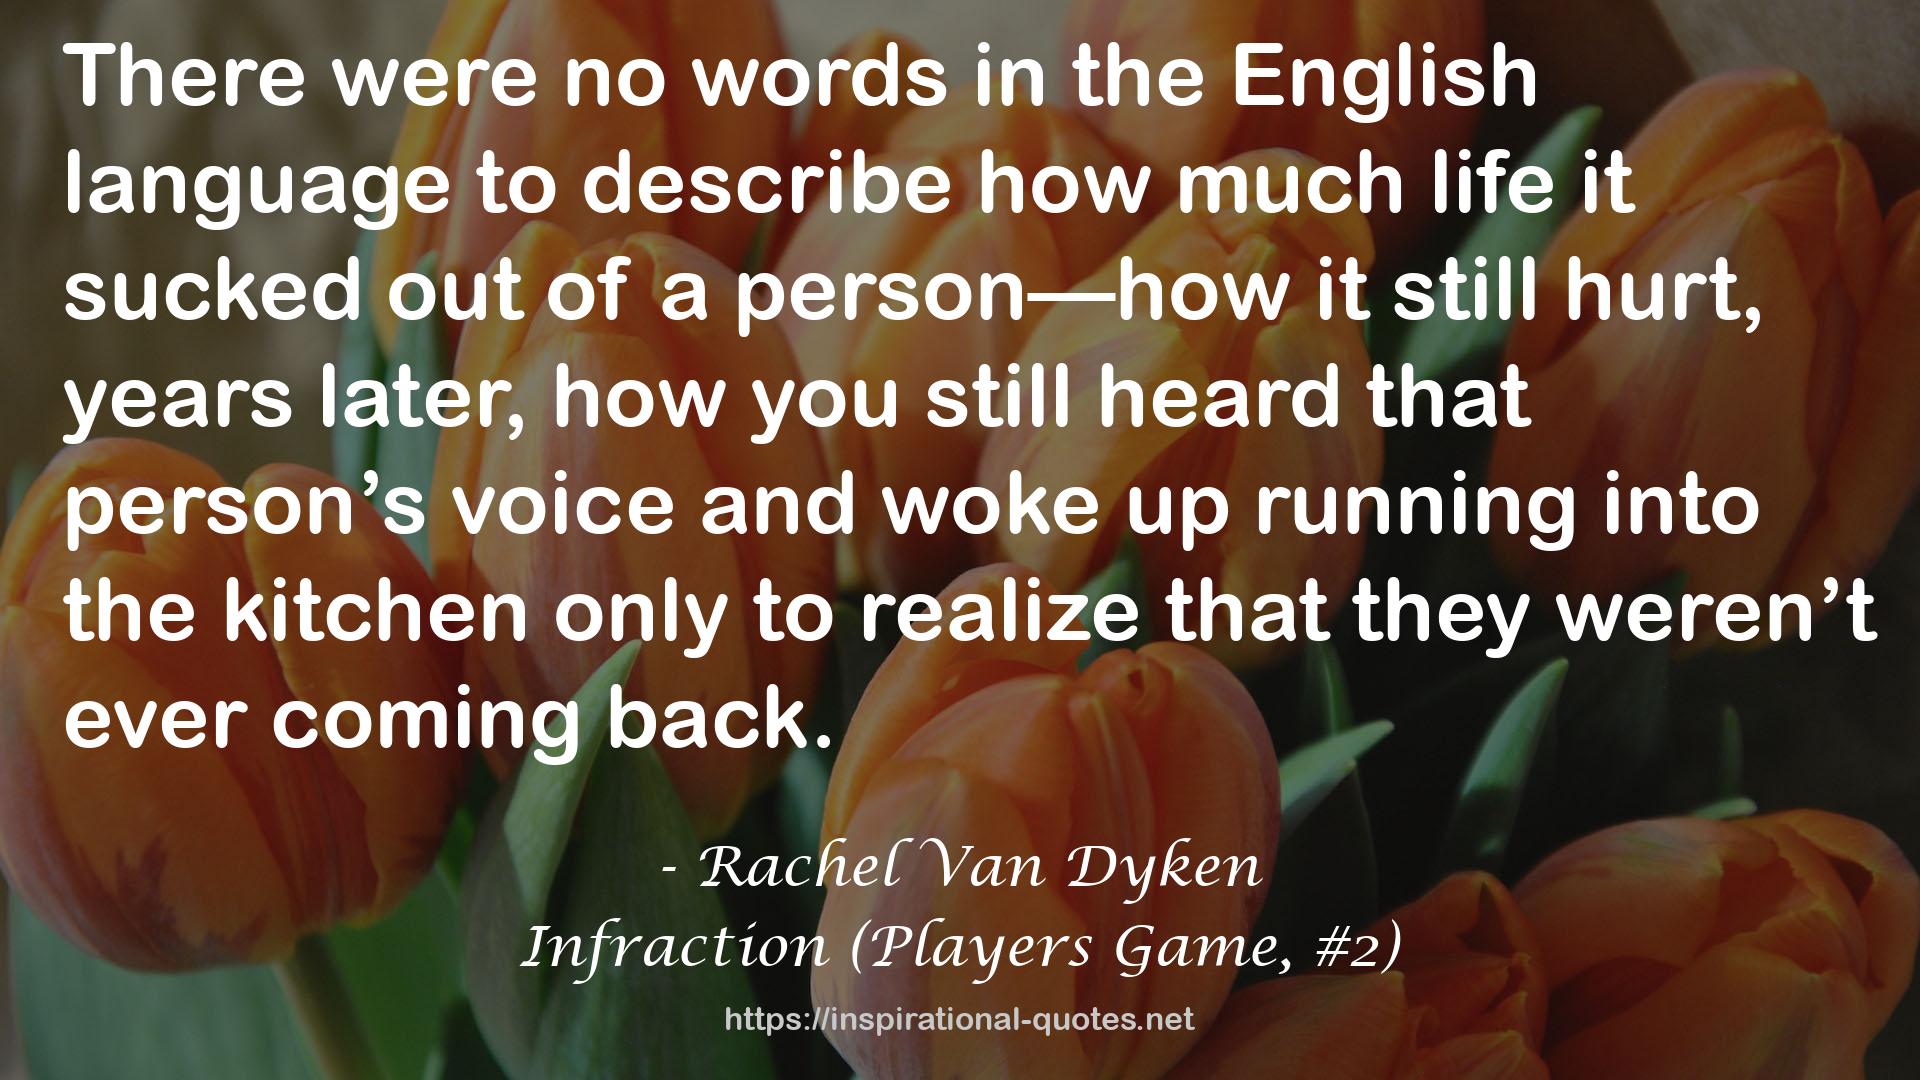 Infraction (Players Game, #2) QUOTES